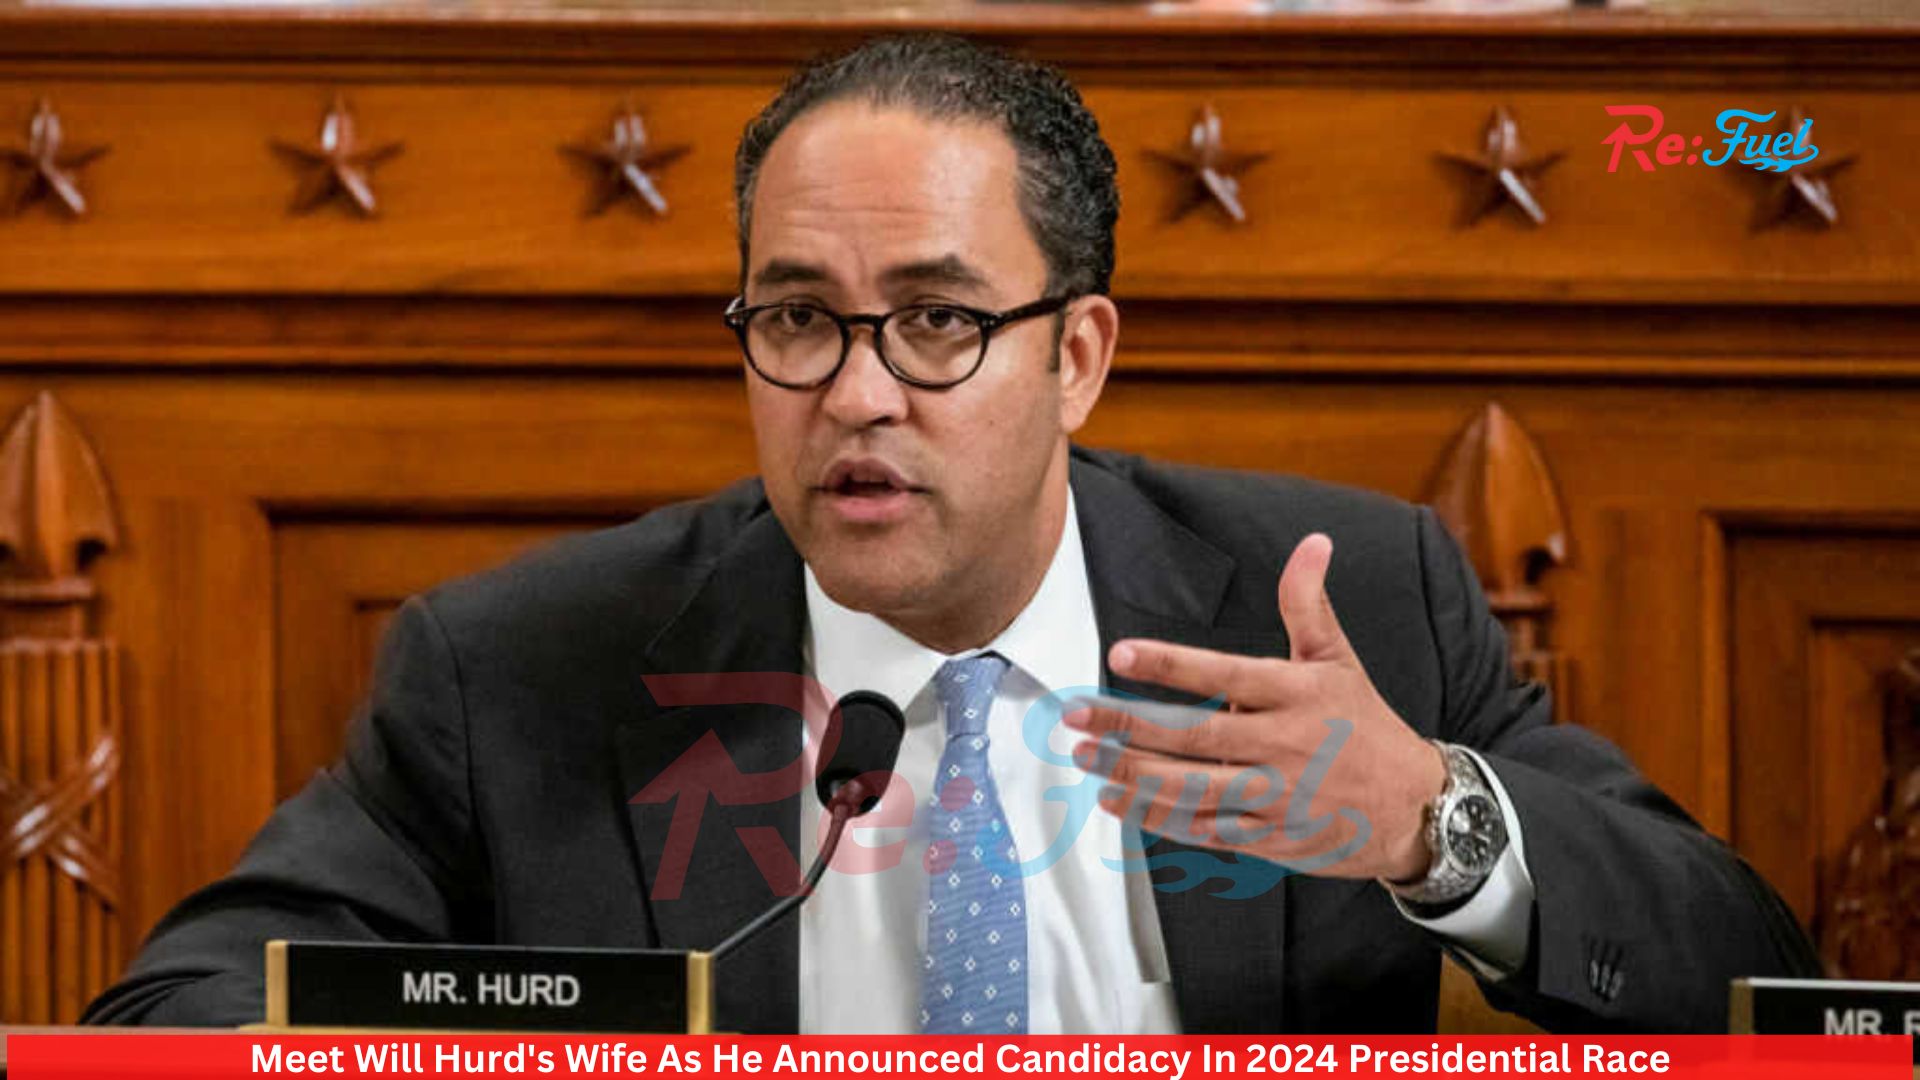 Meet Will Hurd's Wife As He Announced Candidacy In 2024 Presidential Race